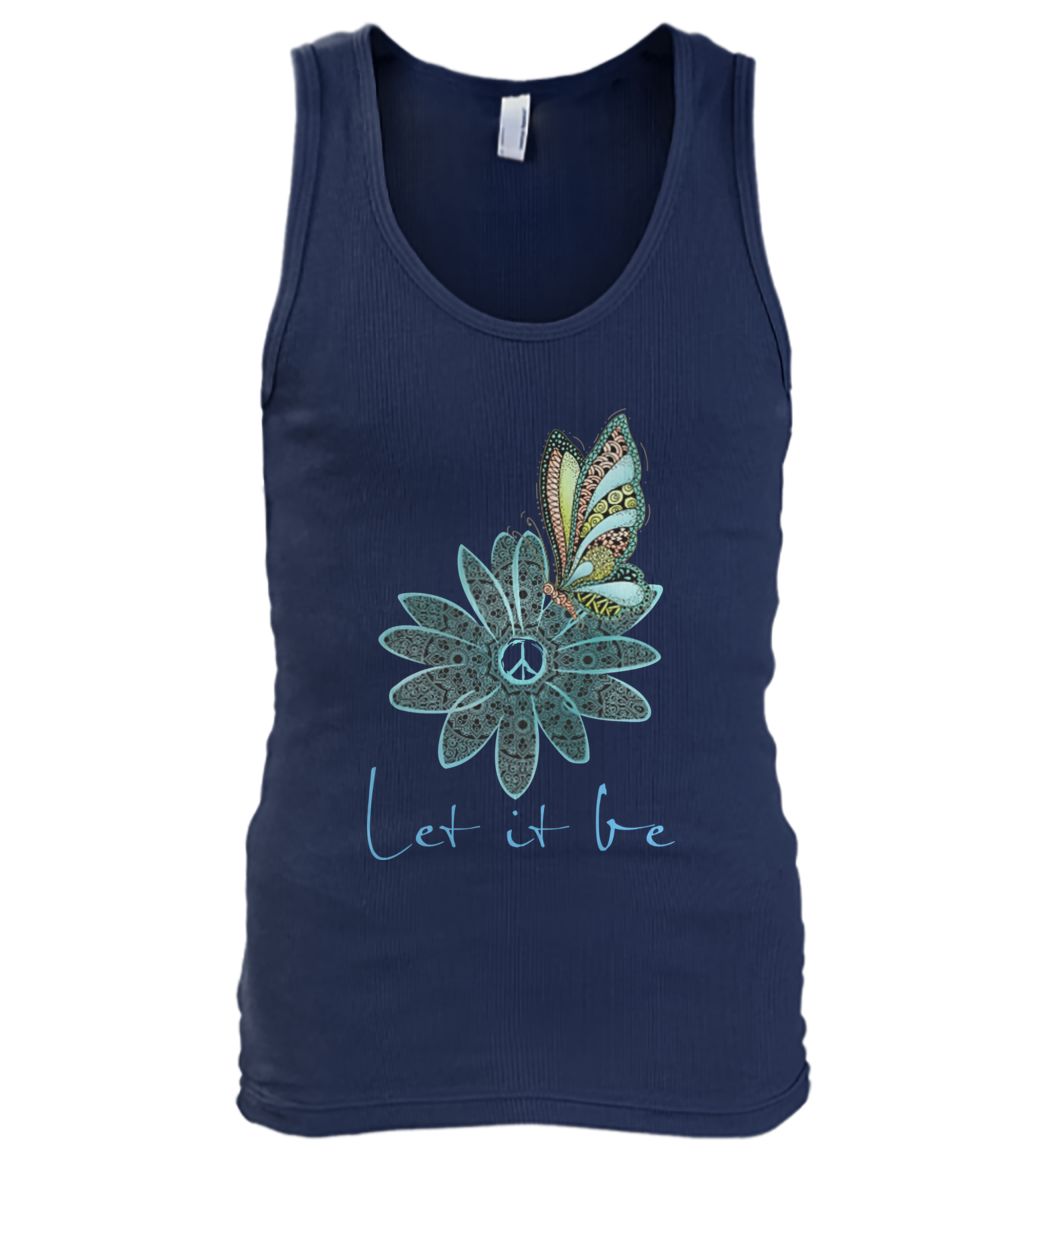 Let it be butterfly and flower men's tank top